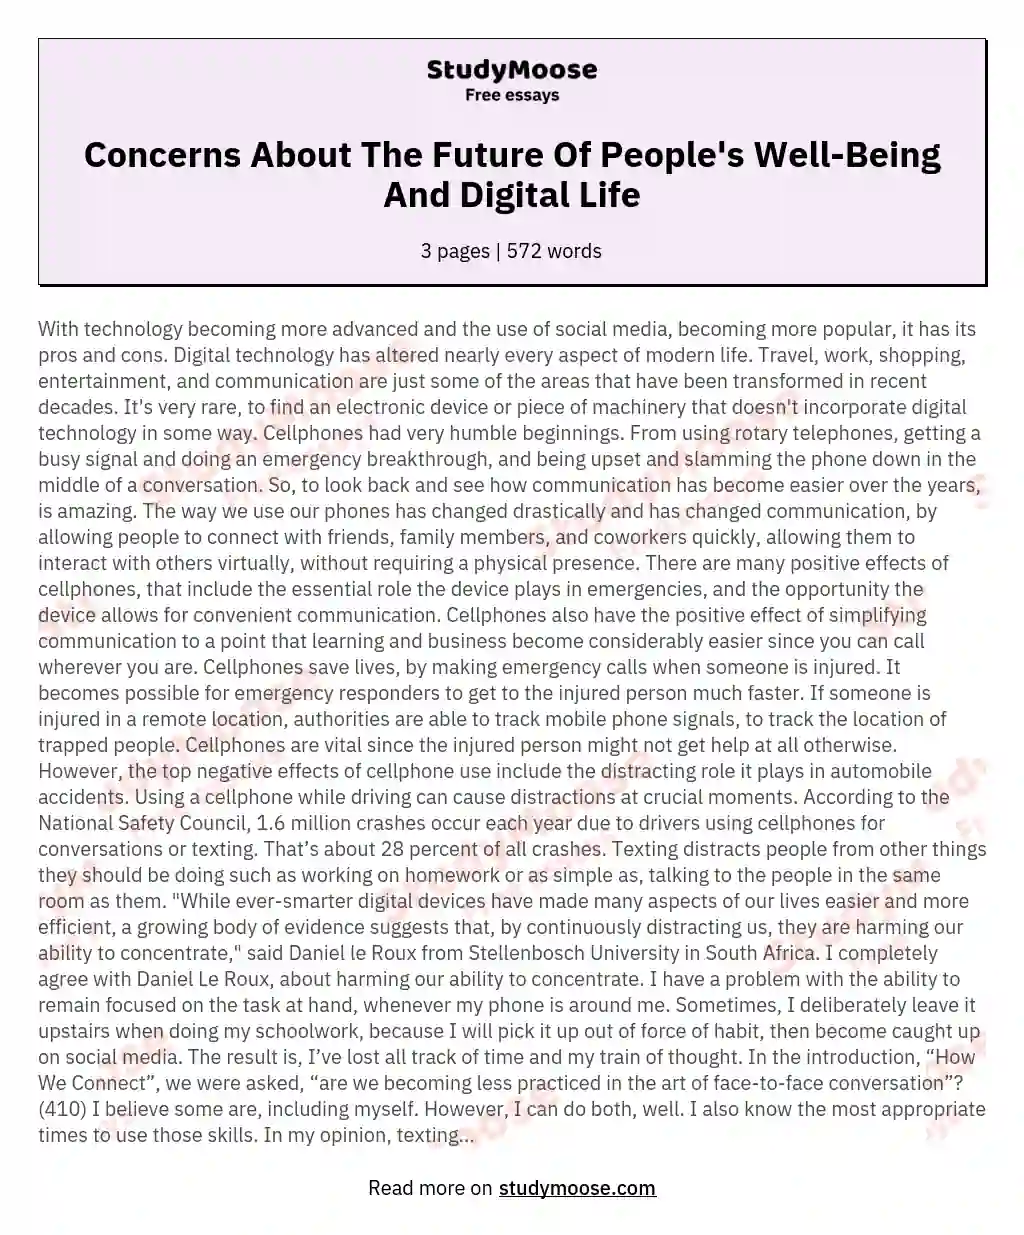 Concerns About The Future Of People's Well-Being And Digital Life essay